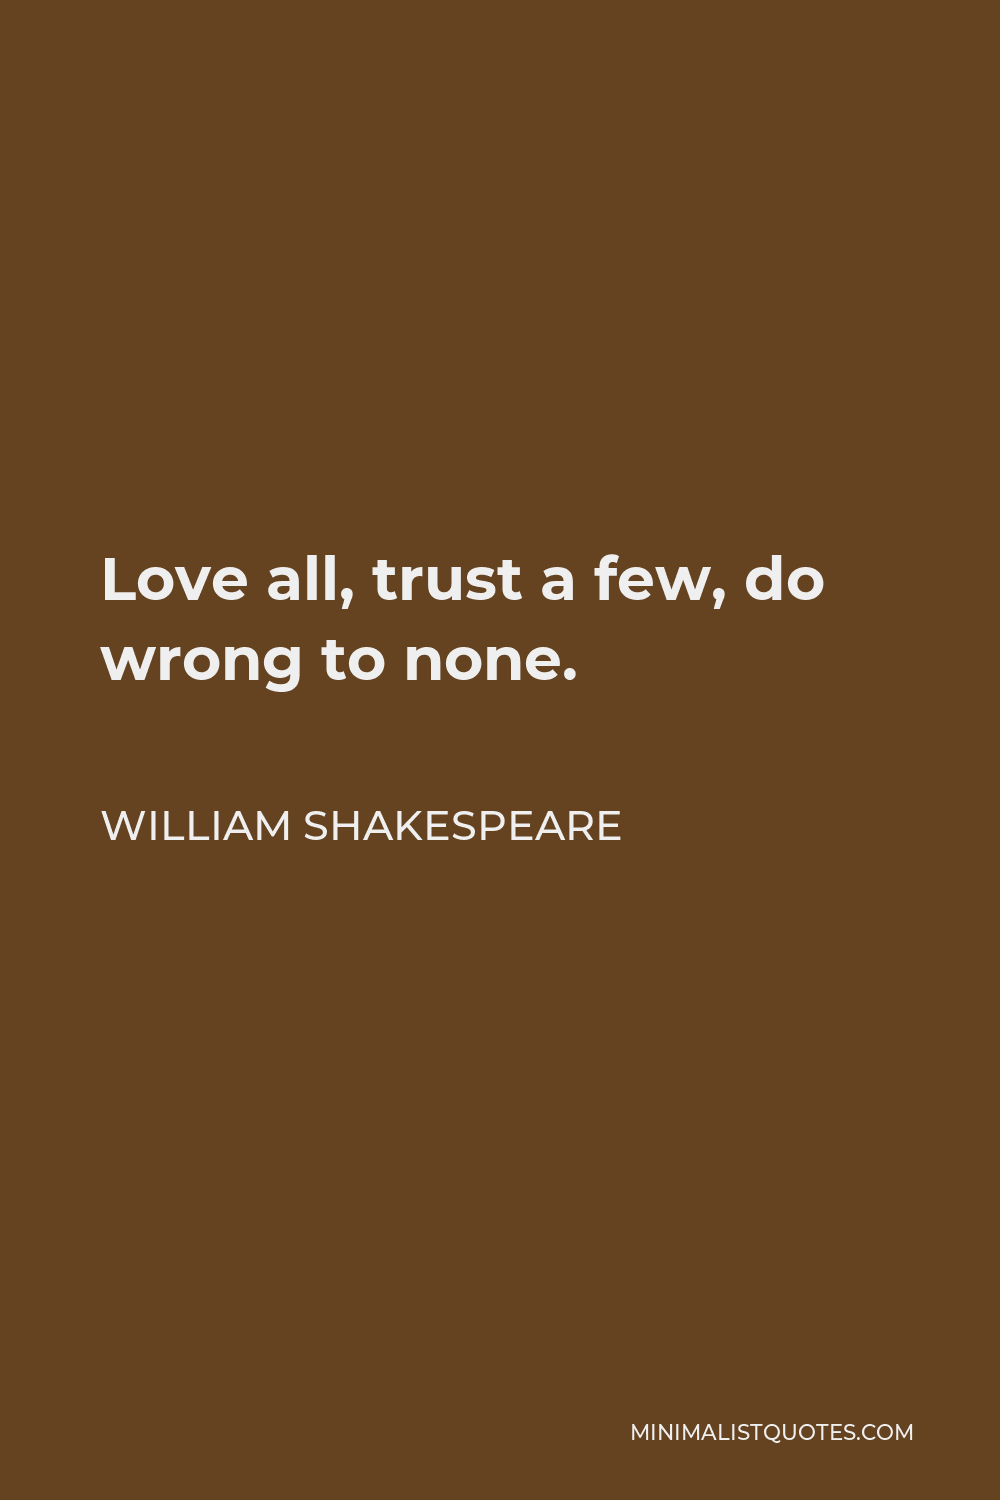 William Shakespeare Quote - Love all, trust a few, do wrong to none.